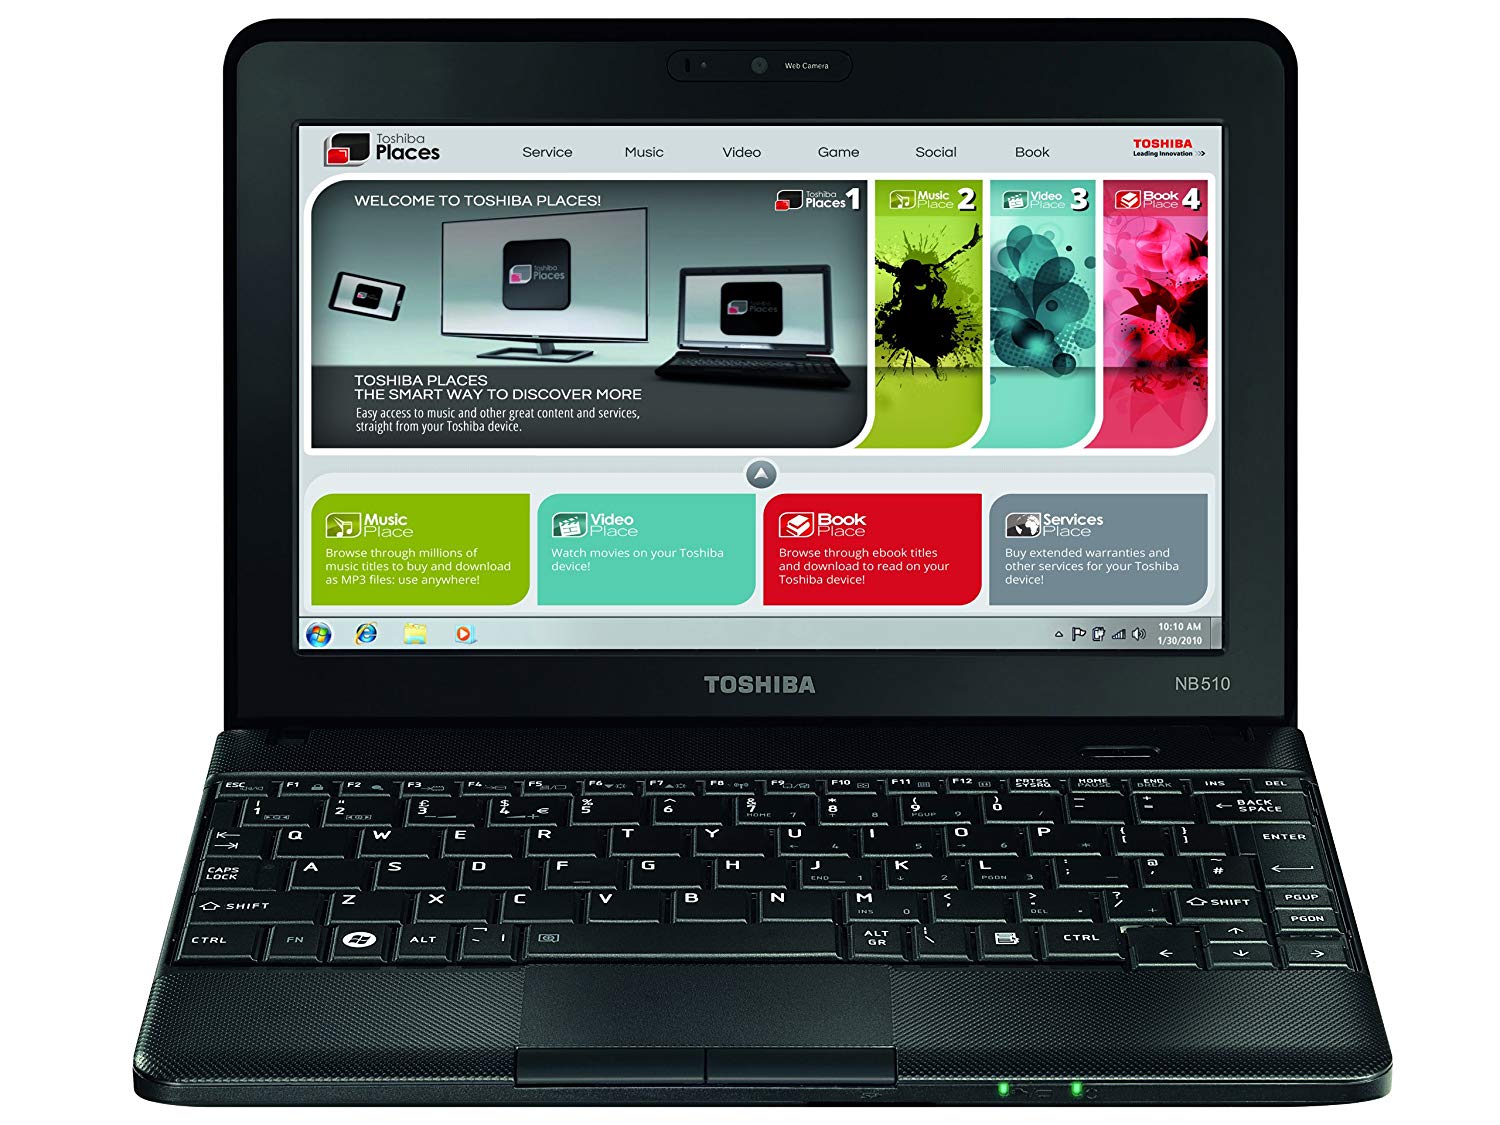 Download Driver Netbook Toshiba Nb510